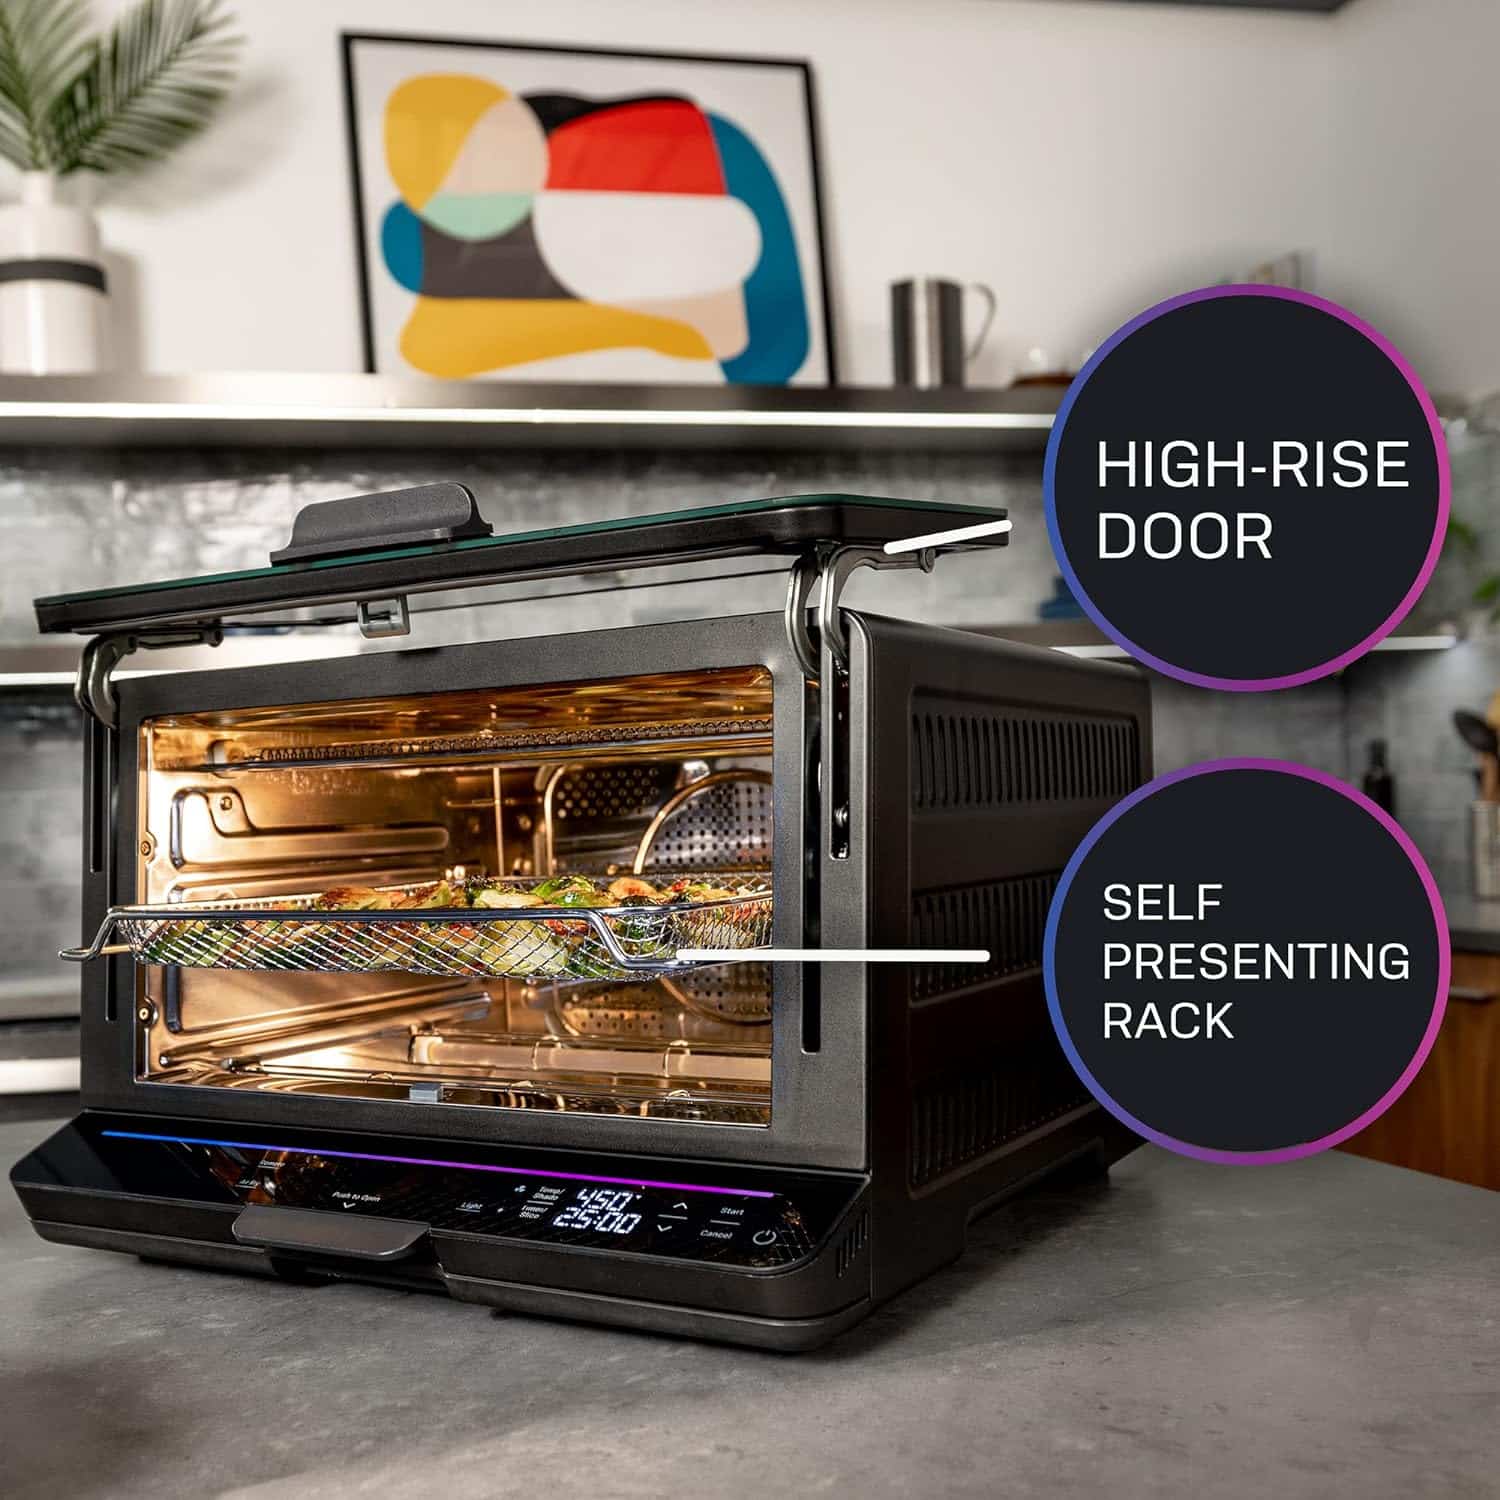 GE Profile Smart Oven with No Preheat: The Ultimate Countertop Oven Review